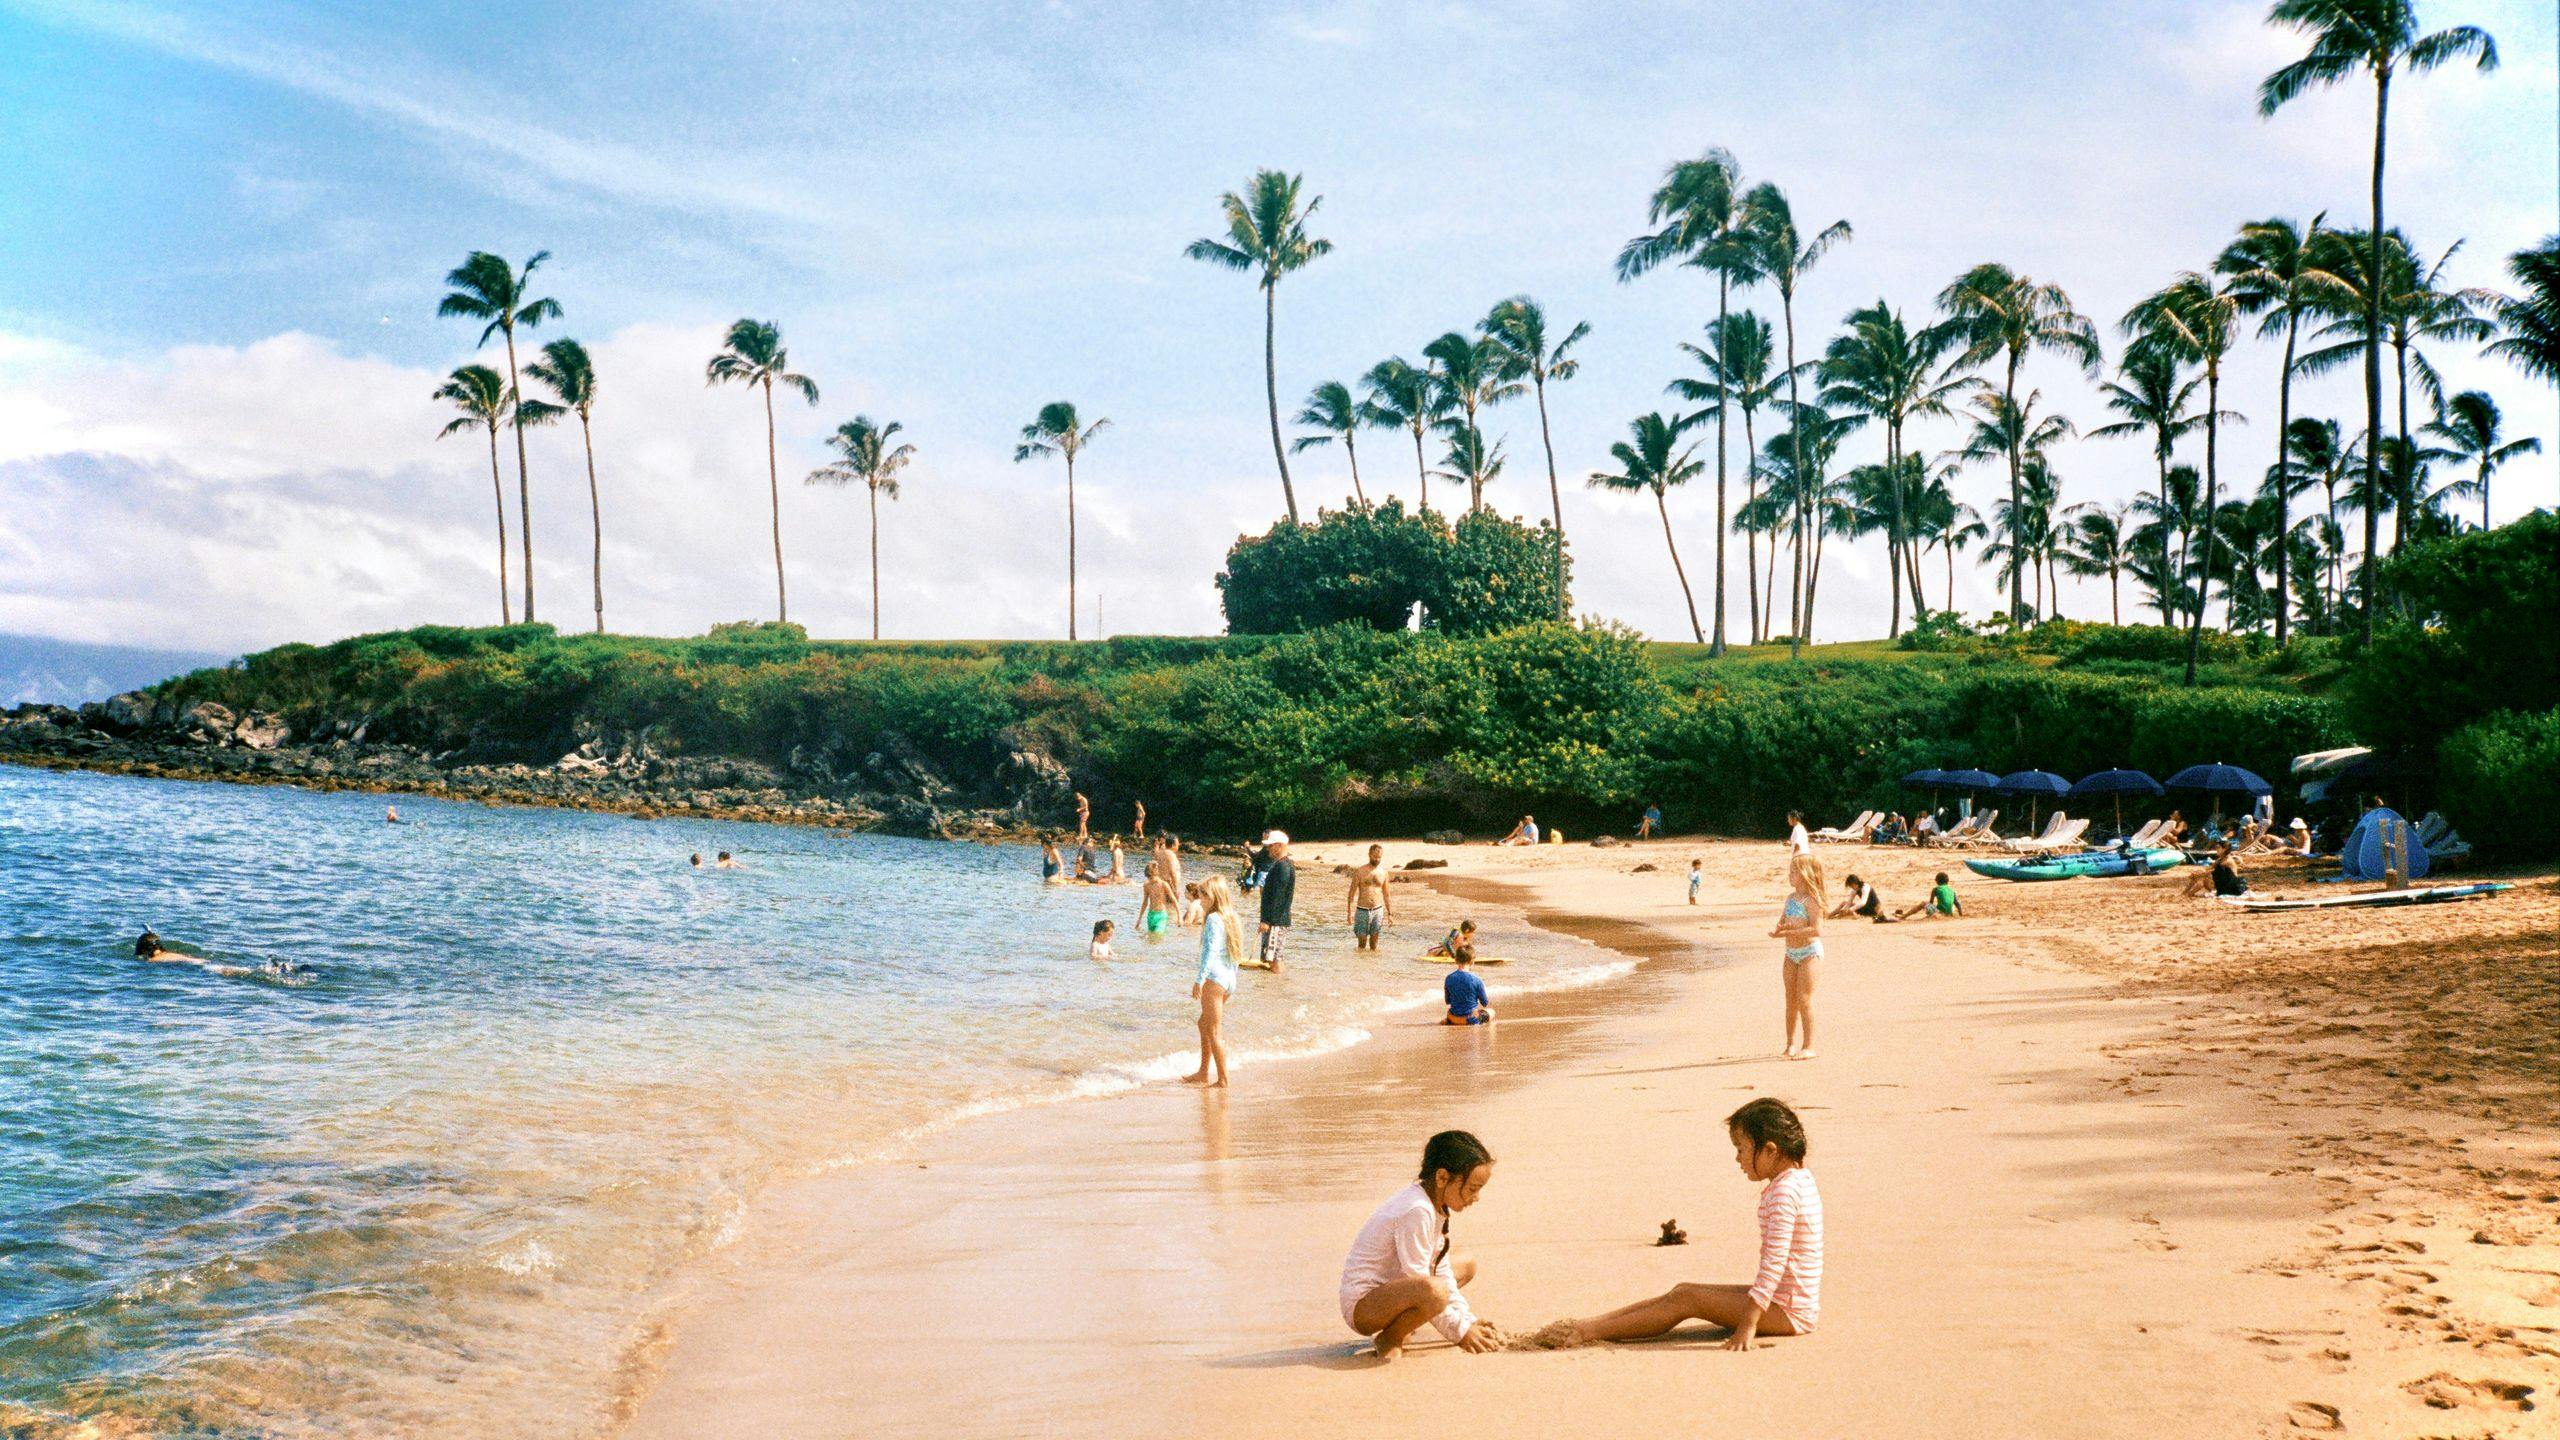 Children planing in the beaches of Maui, Hawaii captured on a Contact T3 by Natalie Carrasco